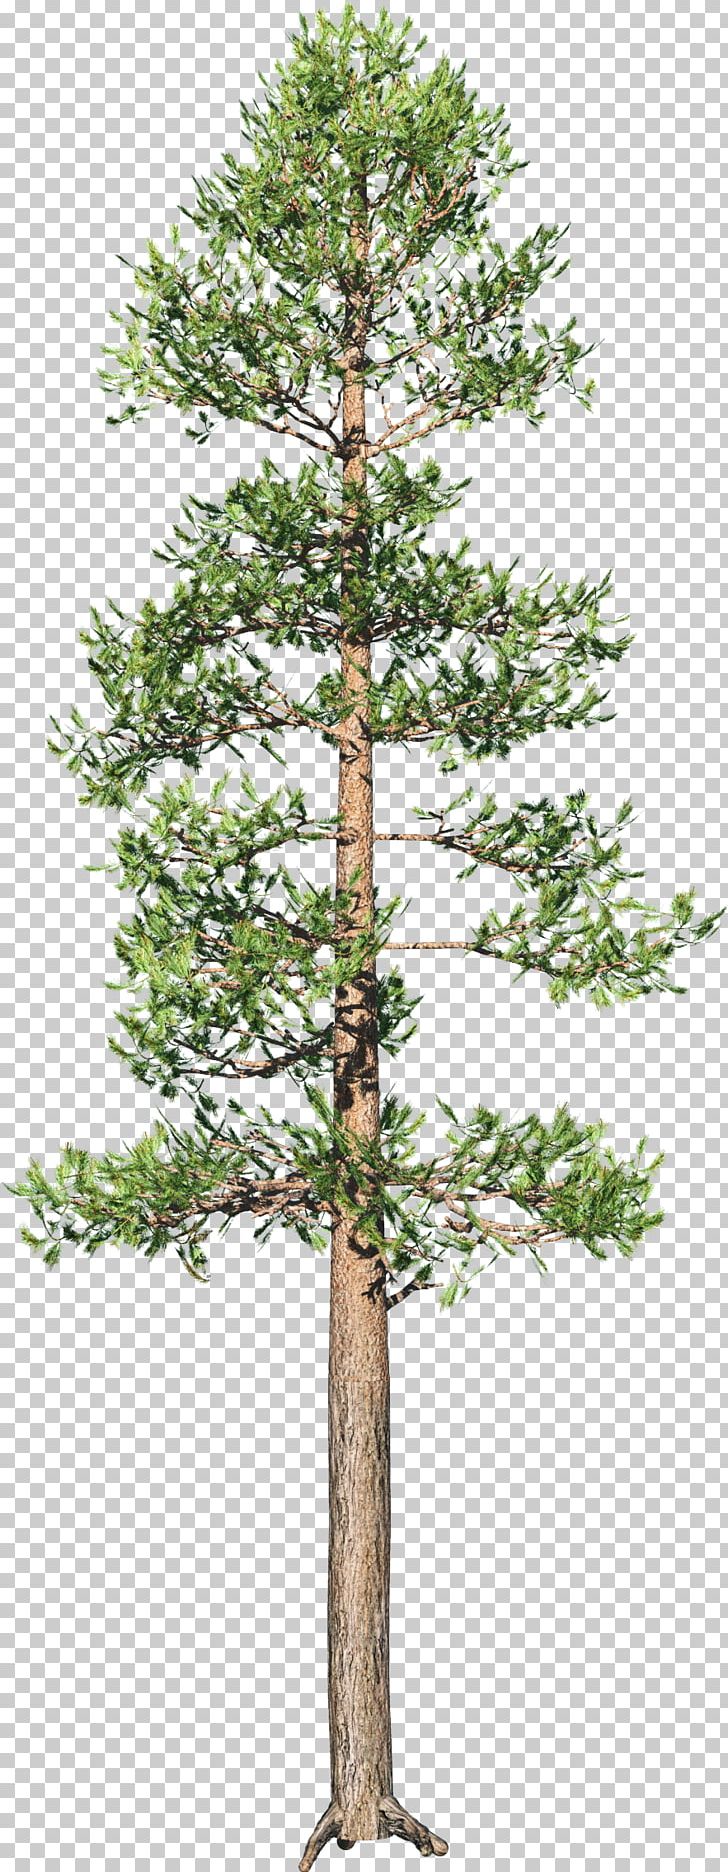 Tree Spruce Branch Conifers Plant PNG, Clipart, Bonsai, Branch, Conifer, Conifers, Evergreen Free PNG Download